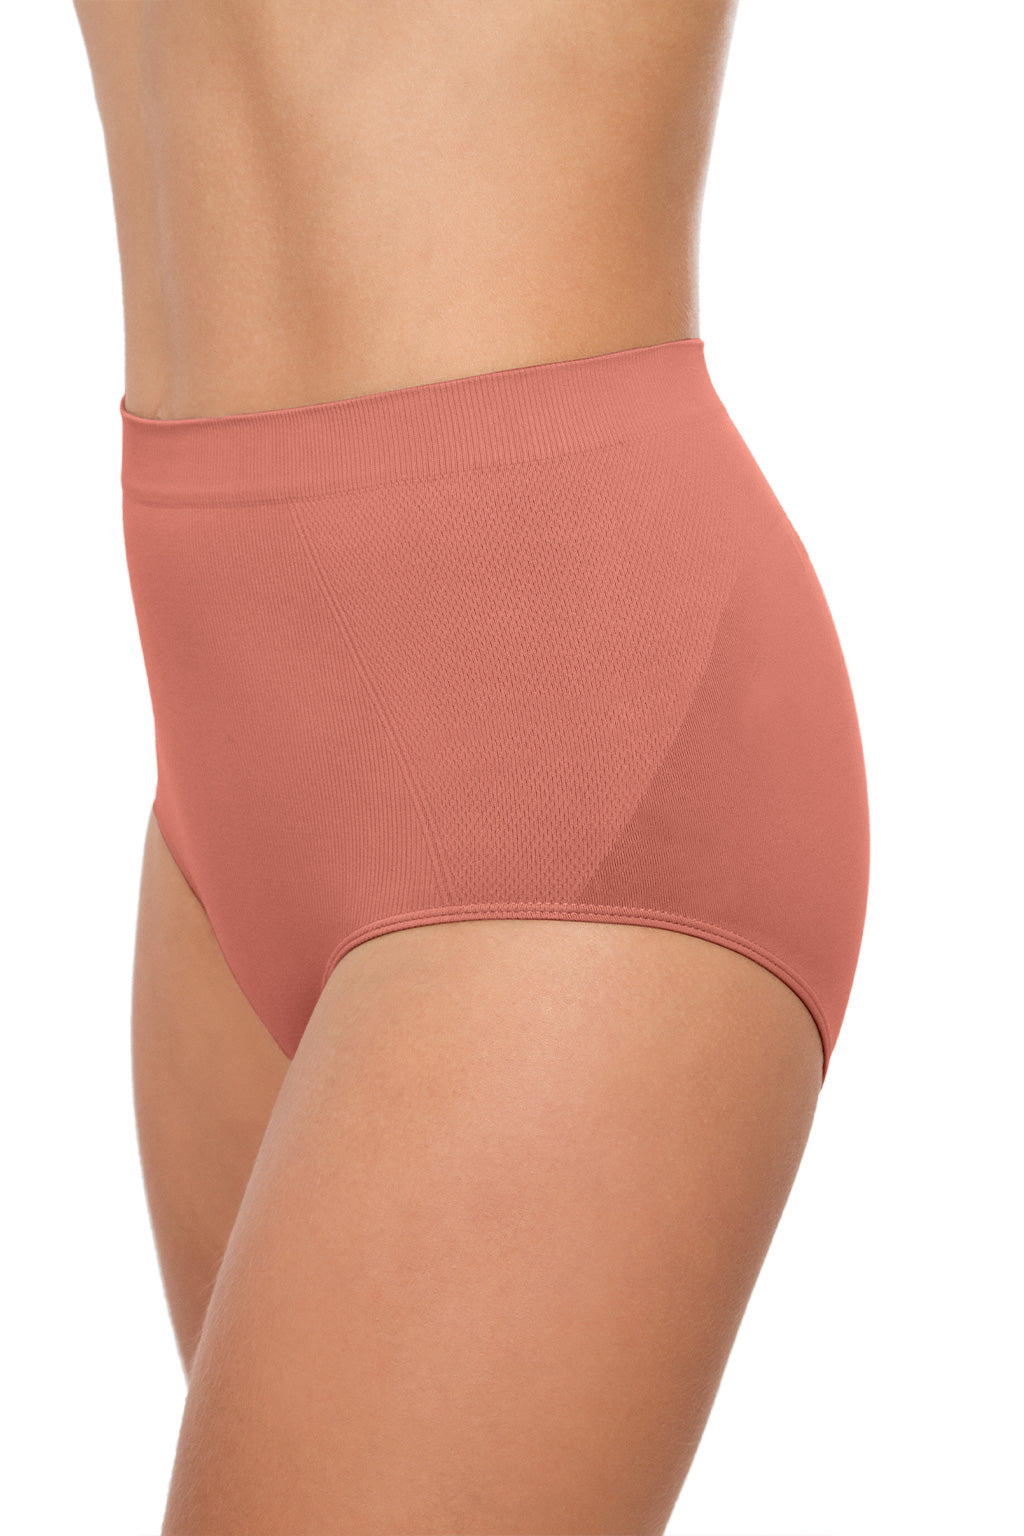 Cotton high-waisted shaping control thong - tummy control underwear